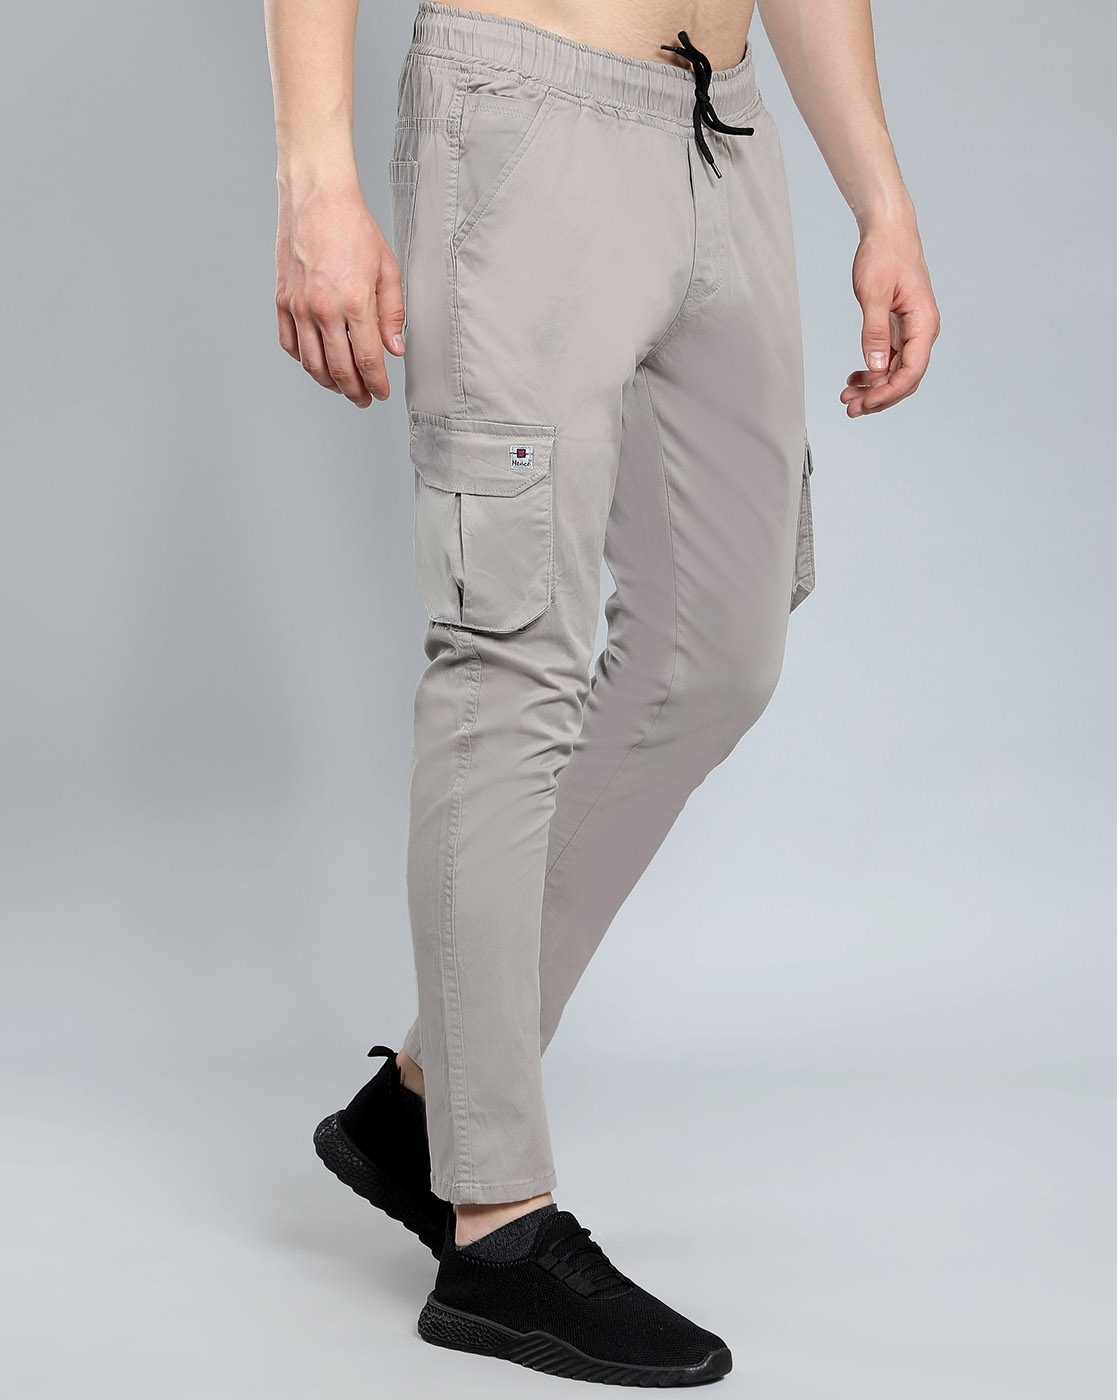 Roadster Trousers & Lowers sale - discounted price | FASHIOLA INDIA